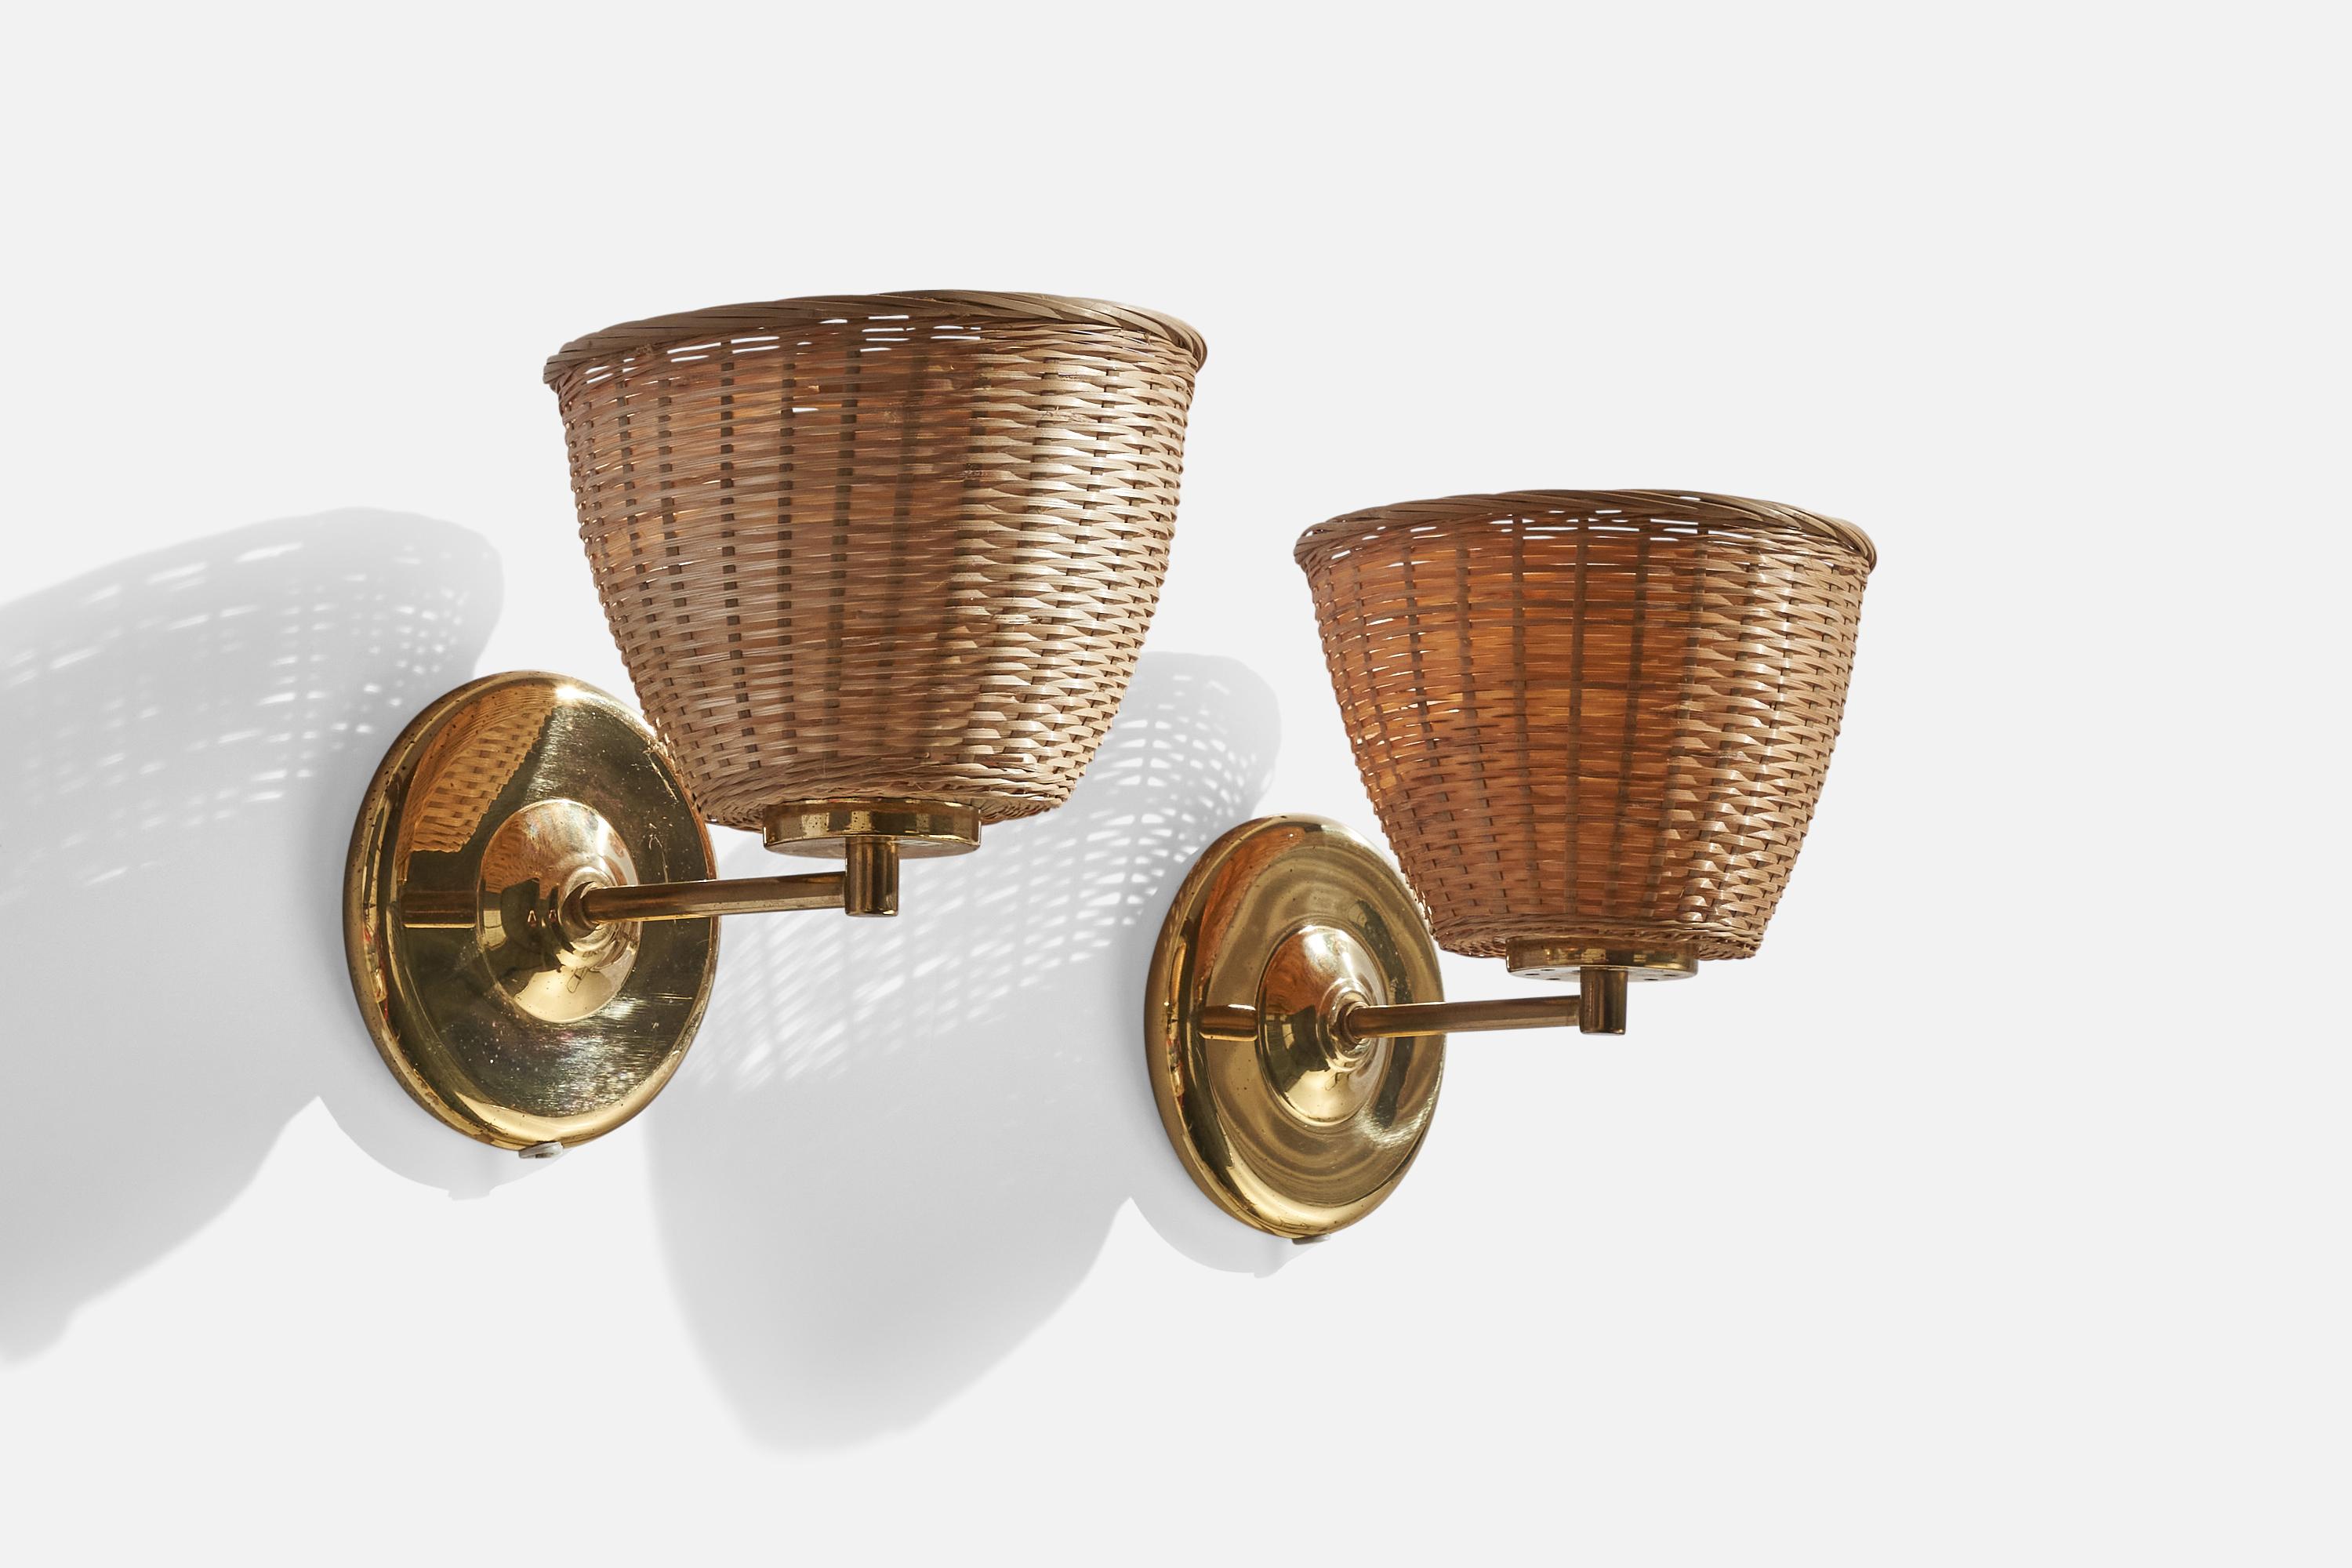 A pair of brass and rattan wall lights designed and produced by Ivars, Sweden, 1960s.

Overall Dimensions (inches): 8” H x 6.25” W x 8” D
Back Plate Dimensions (inches): 5” H x 5” W x .75” D
Bulb Specifications: E-26 Bulb
Number of Sockets: 2
All